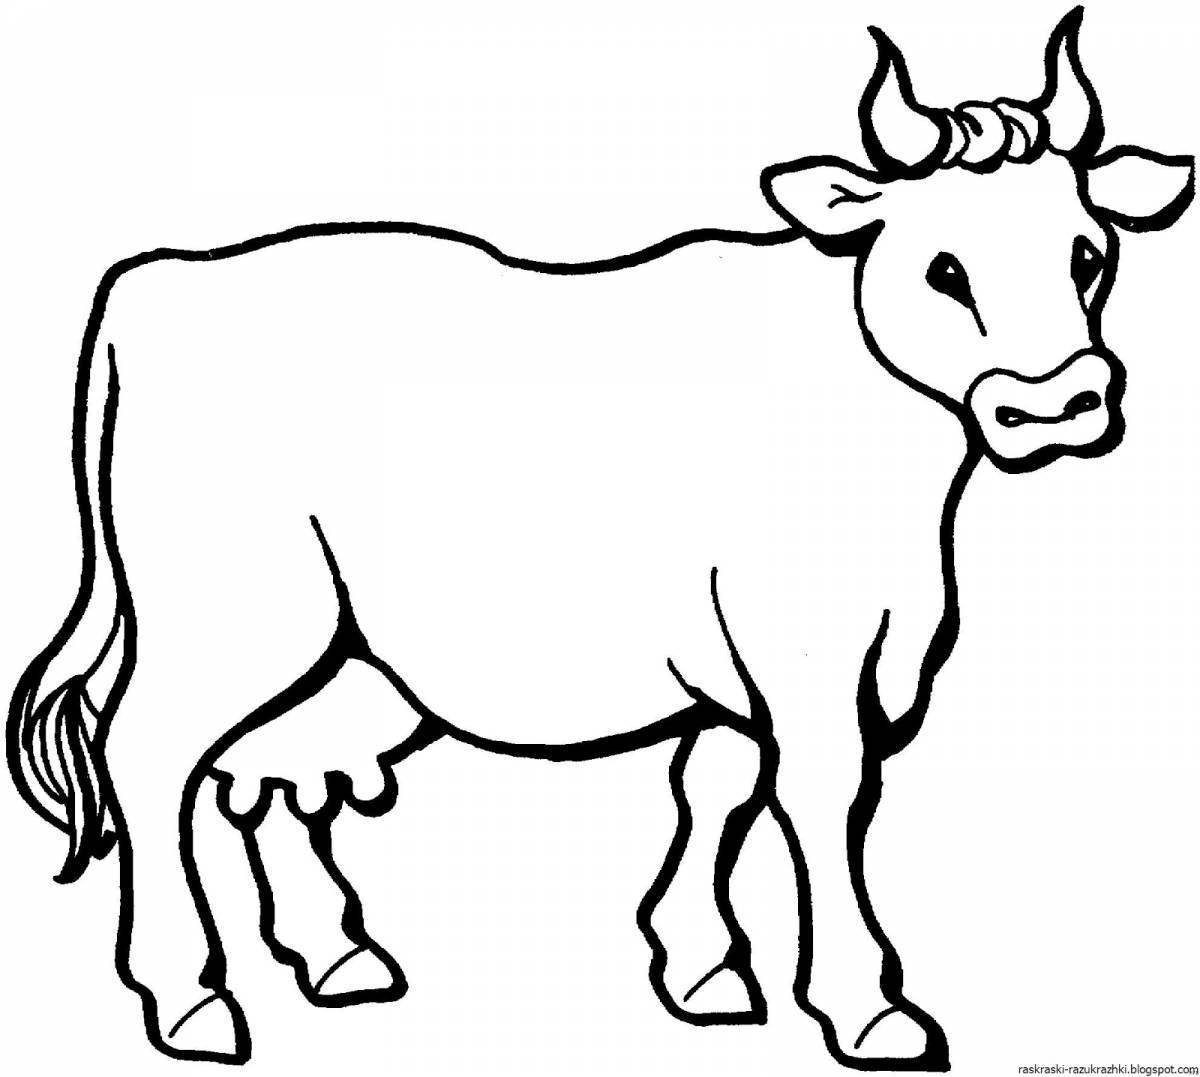 Coloring book of the magic calf for kids